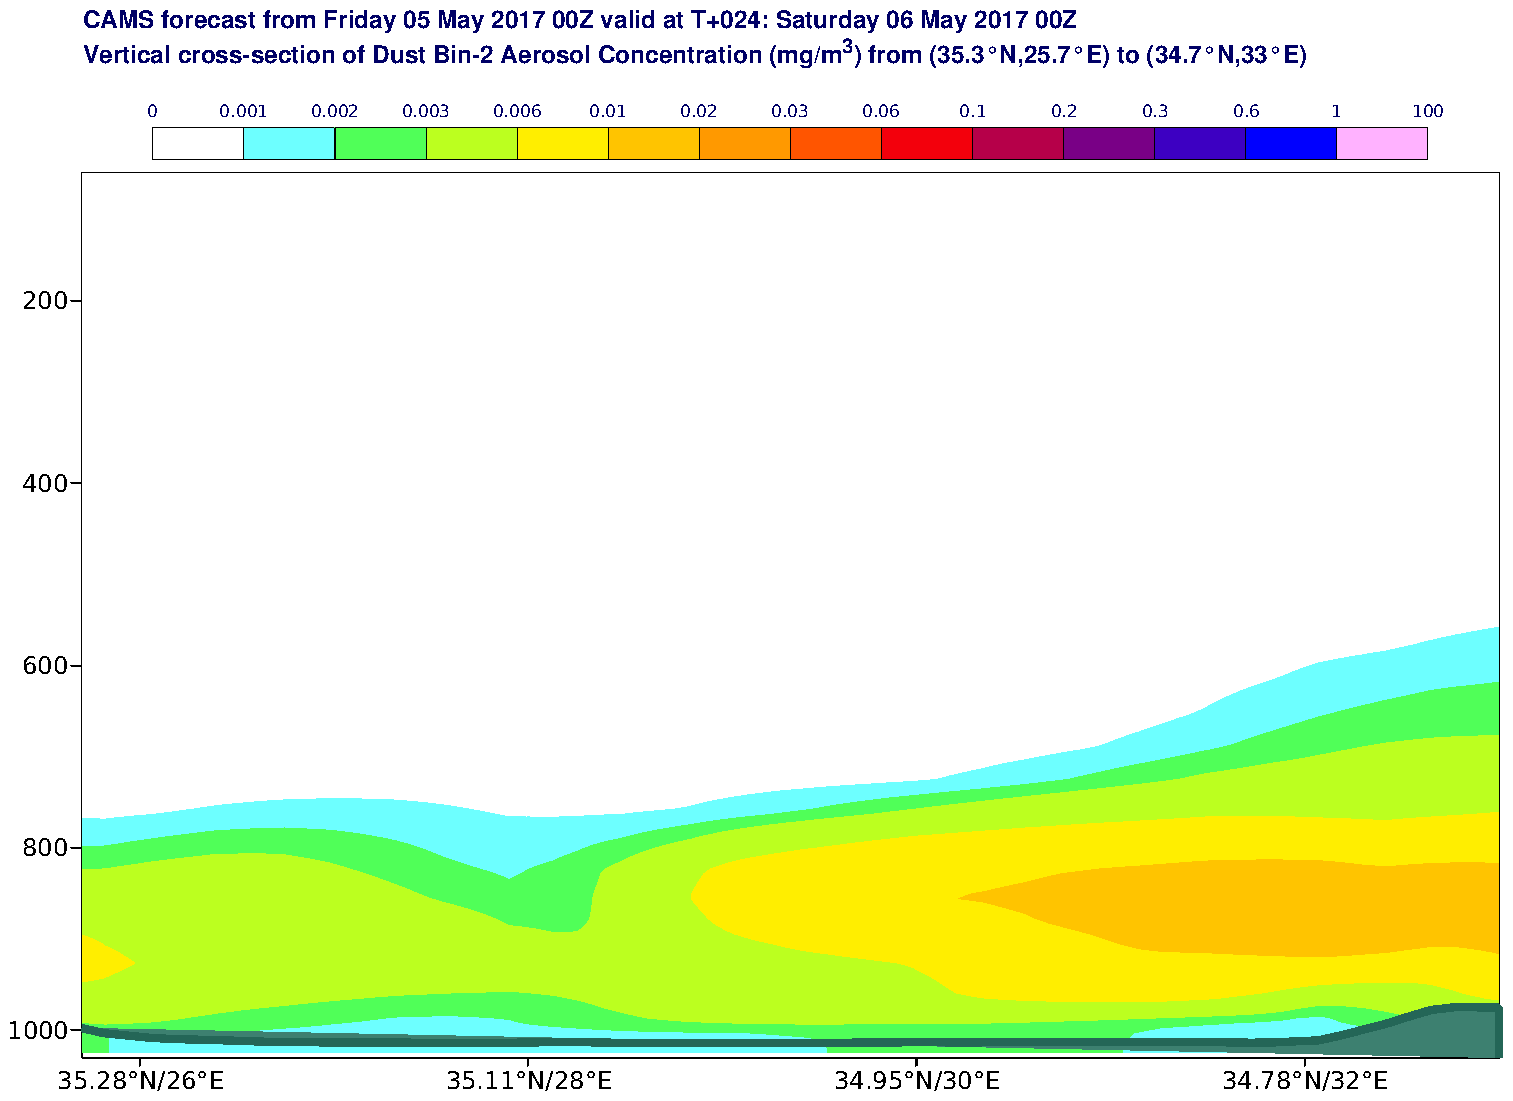 Vertical cross-section of Dust Bin-2 Aerosol Concentration (mg/m3) valid at T24 - 2017-05-06 00:00